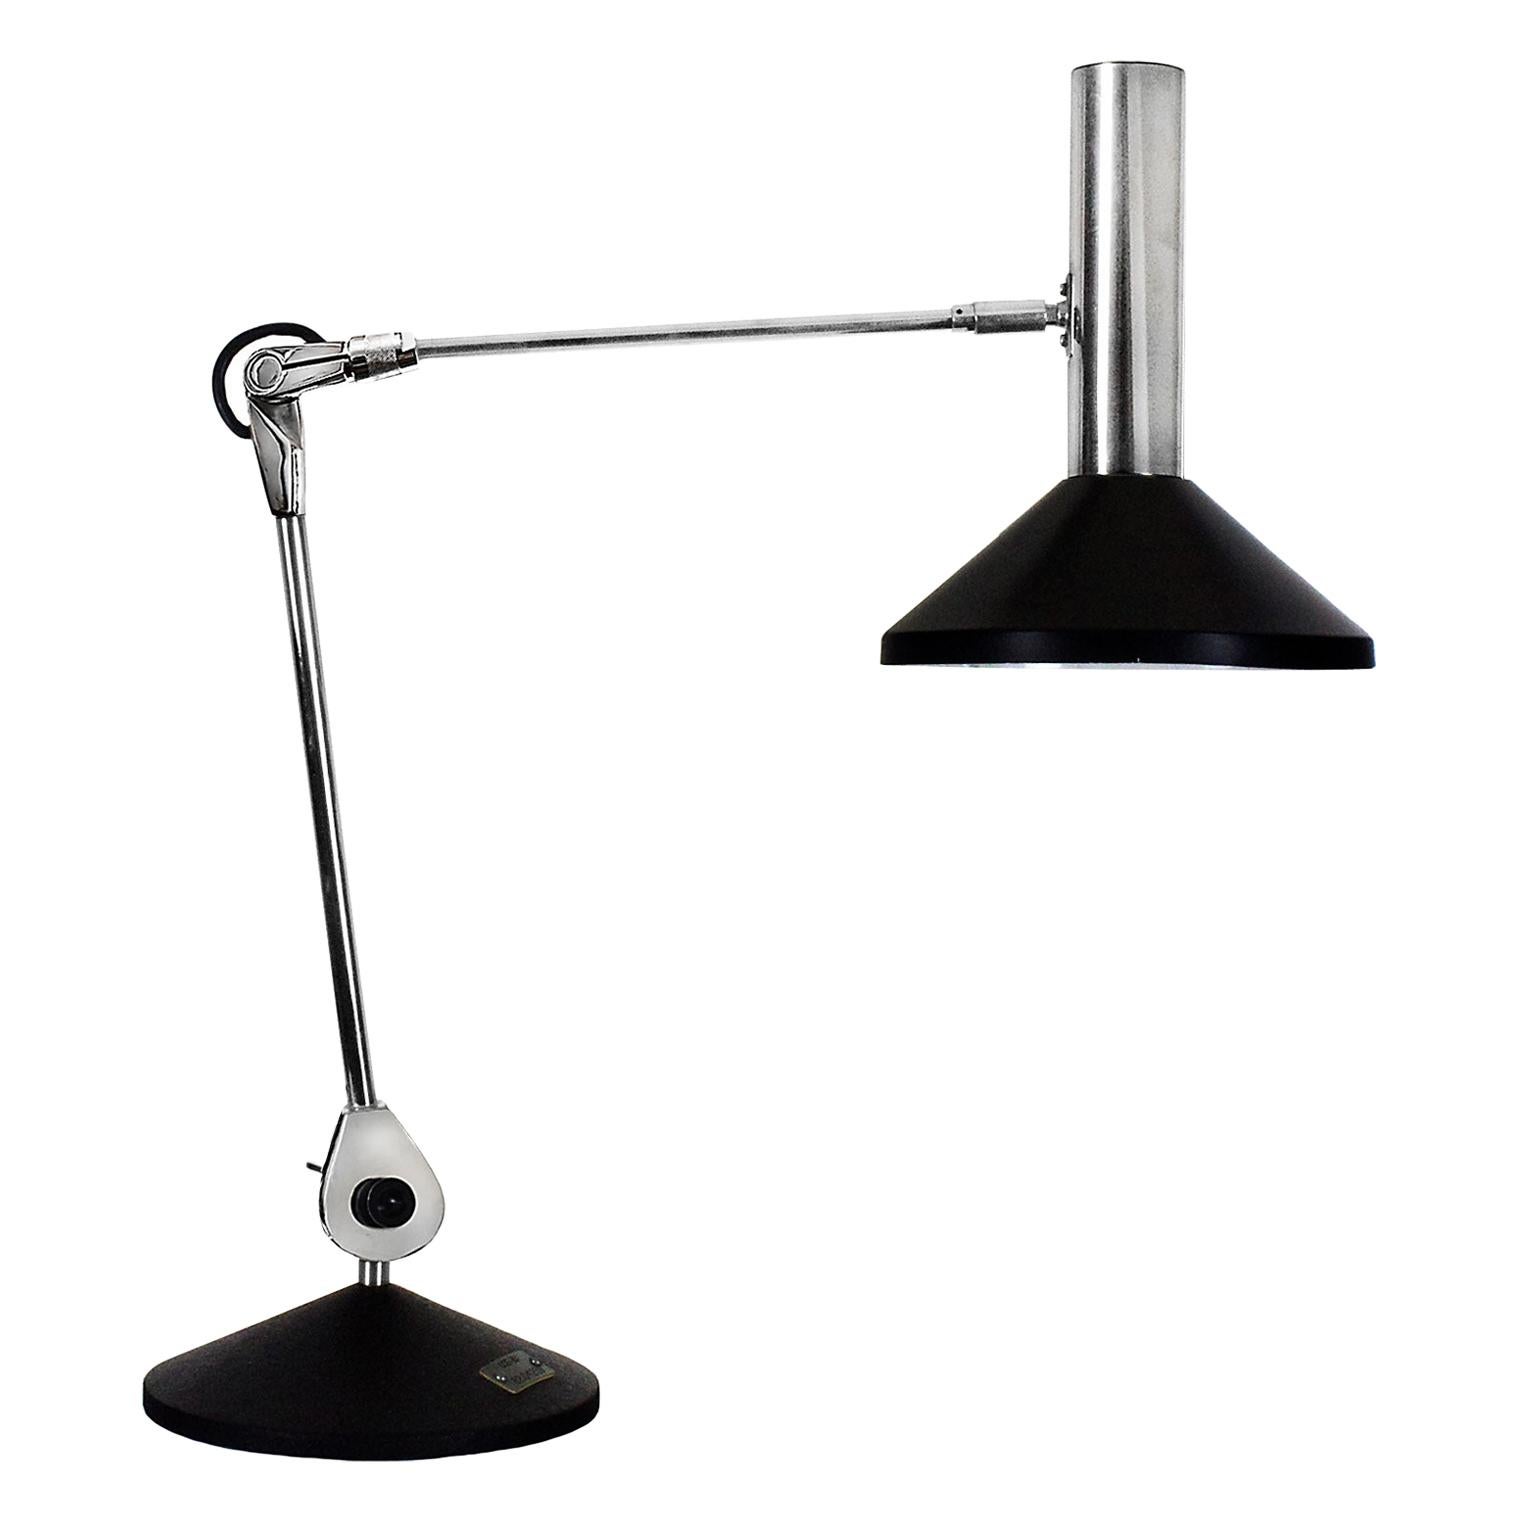  Large Articulated  Mid-Century Modern Chrome-Plated Desk Lamp - Belgium, 1960s